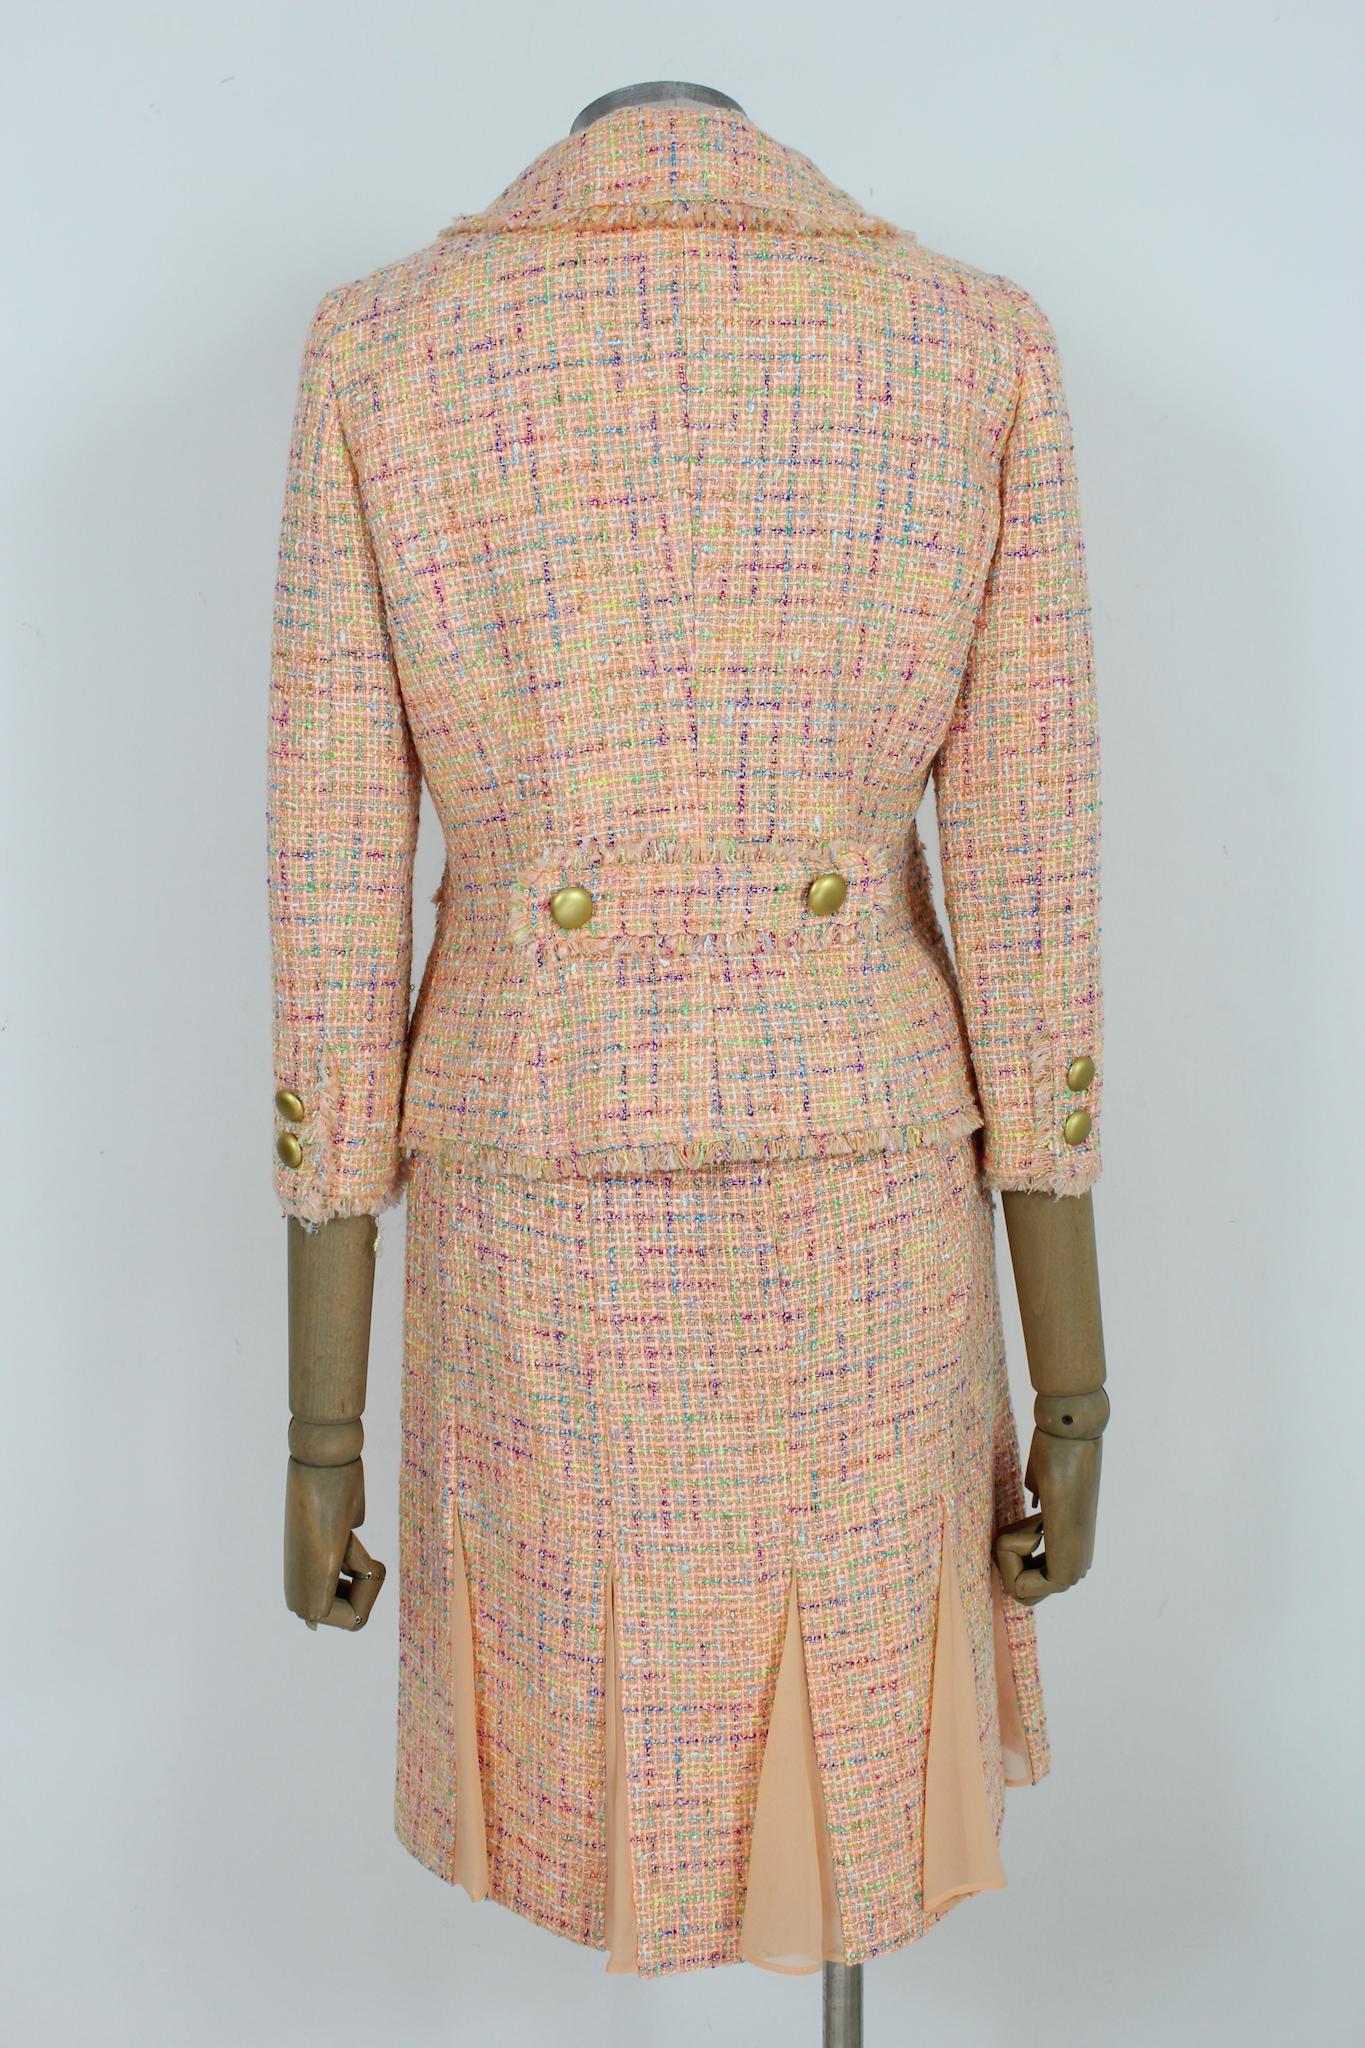 Luisa Spagnoli elegant pink skirt suit 2000s. Suit with pink, blue and green boucle pattern, short flared skirt. Closure with gold-colored buttons. Fabric 50% acrylic, 22% polyester, 3% other fibers, internally lined. Made in Italy.

Size: 42 It 8